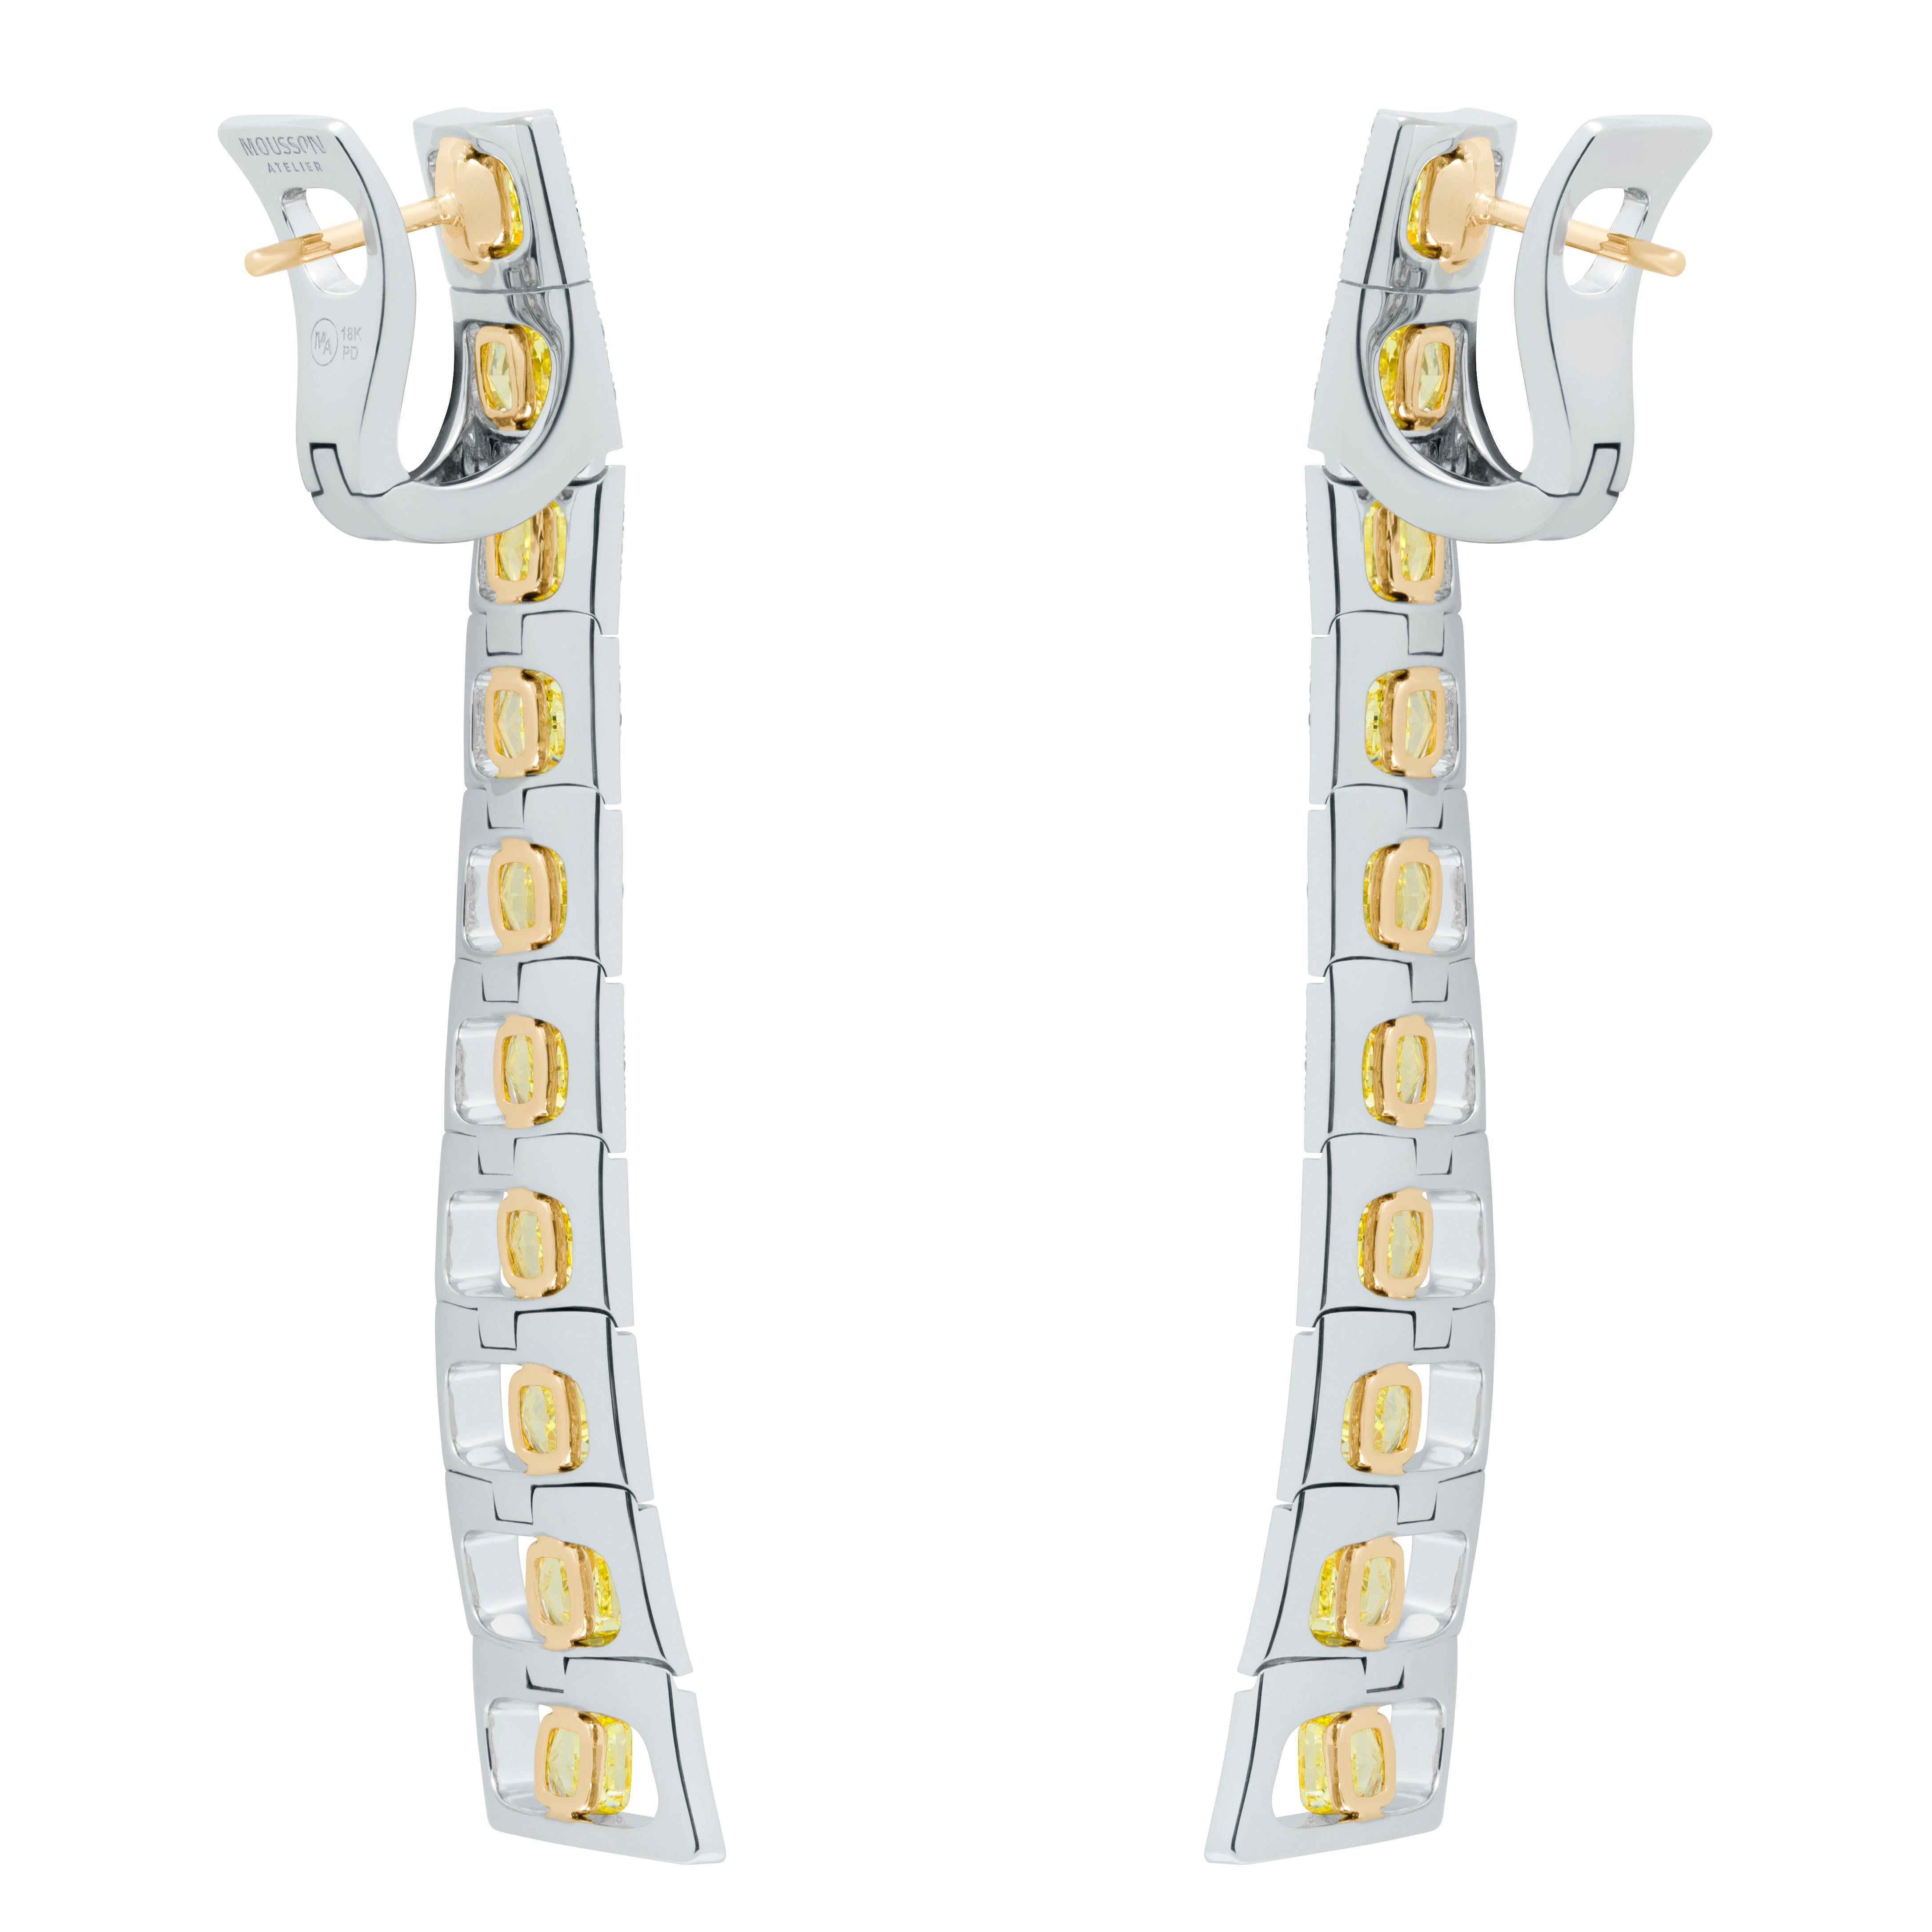 Yellow Diamonds White Diamonds Enamel 18 Karat White Gold High Jewelry Earrings

Introducing our latest creation, earrings, inspired by the Art Deco era. This stunning piece features 20 exquisite cushion-shaped yellow diamonds with a total weight of